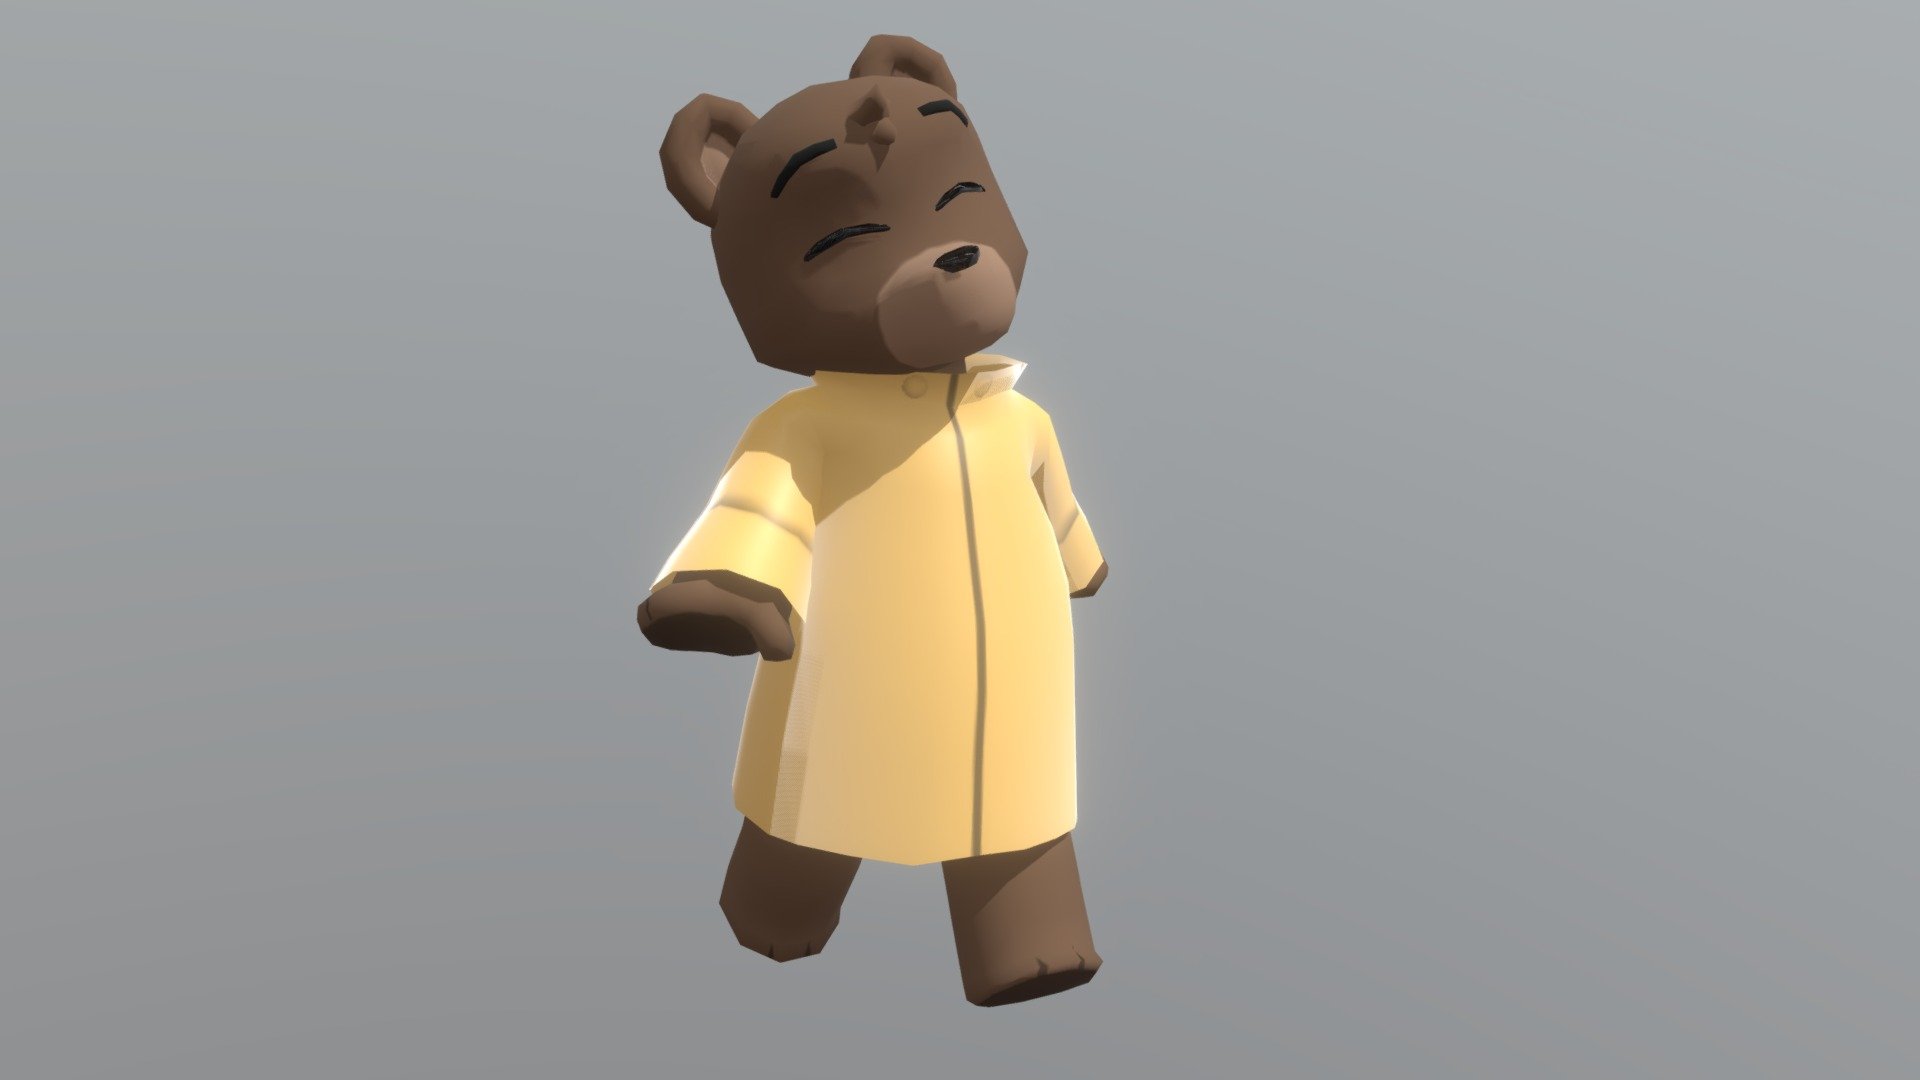 He's just a little bear enjoying himself!

This model was originally built to be used as a VRchat avatar and is optimized as such. Though this version is before atlasing the materials to make it Quest-ready 3d model